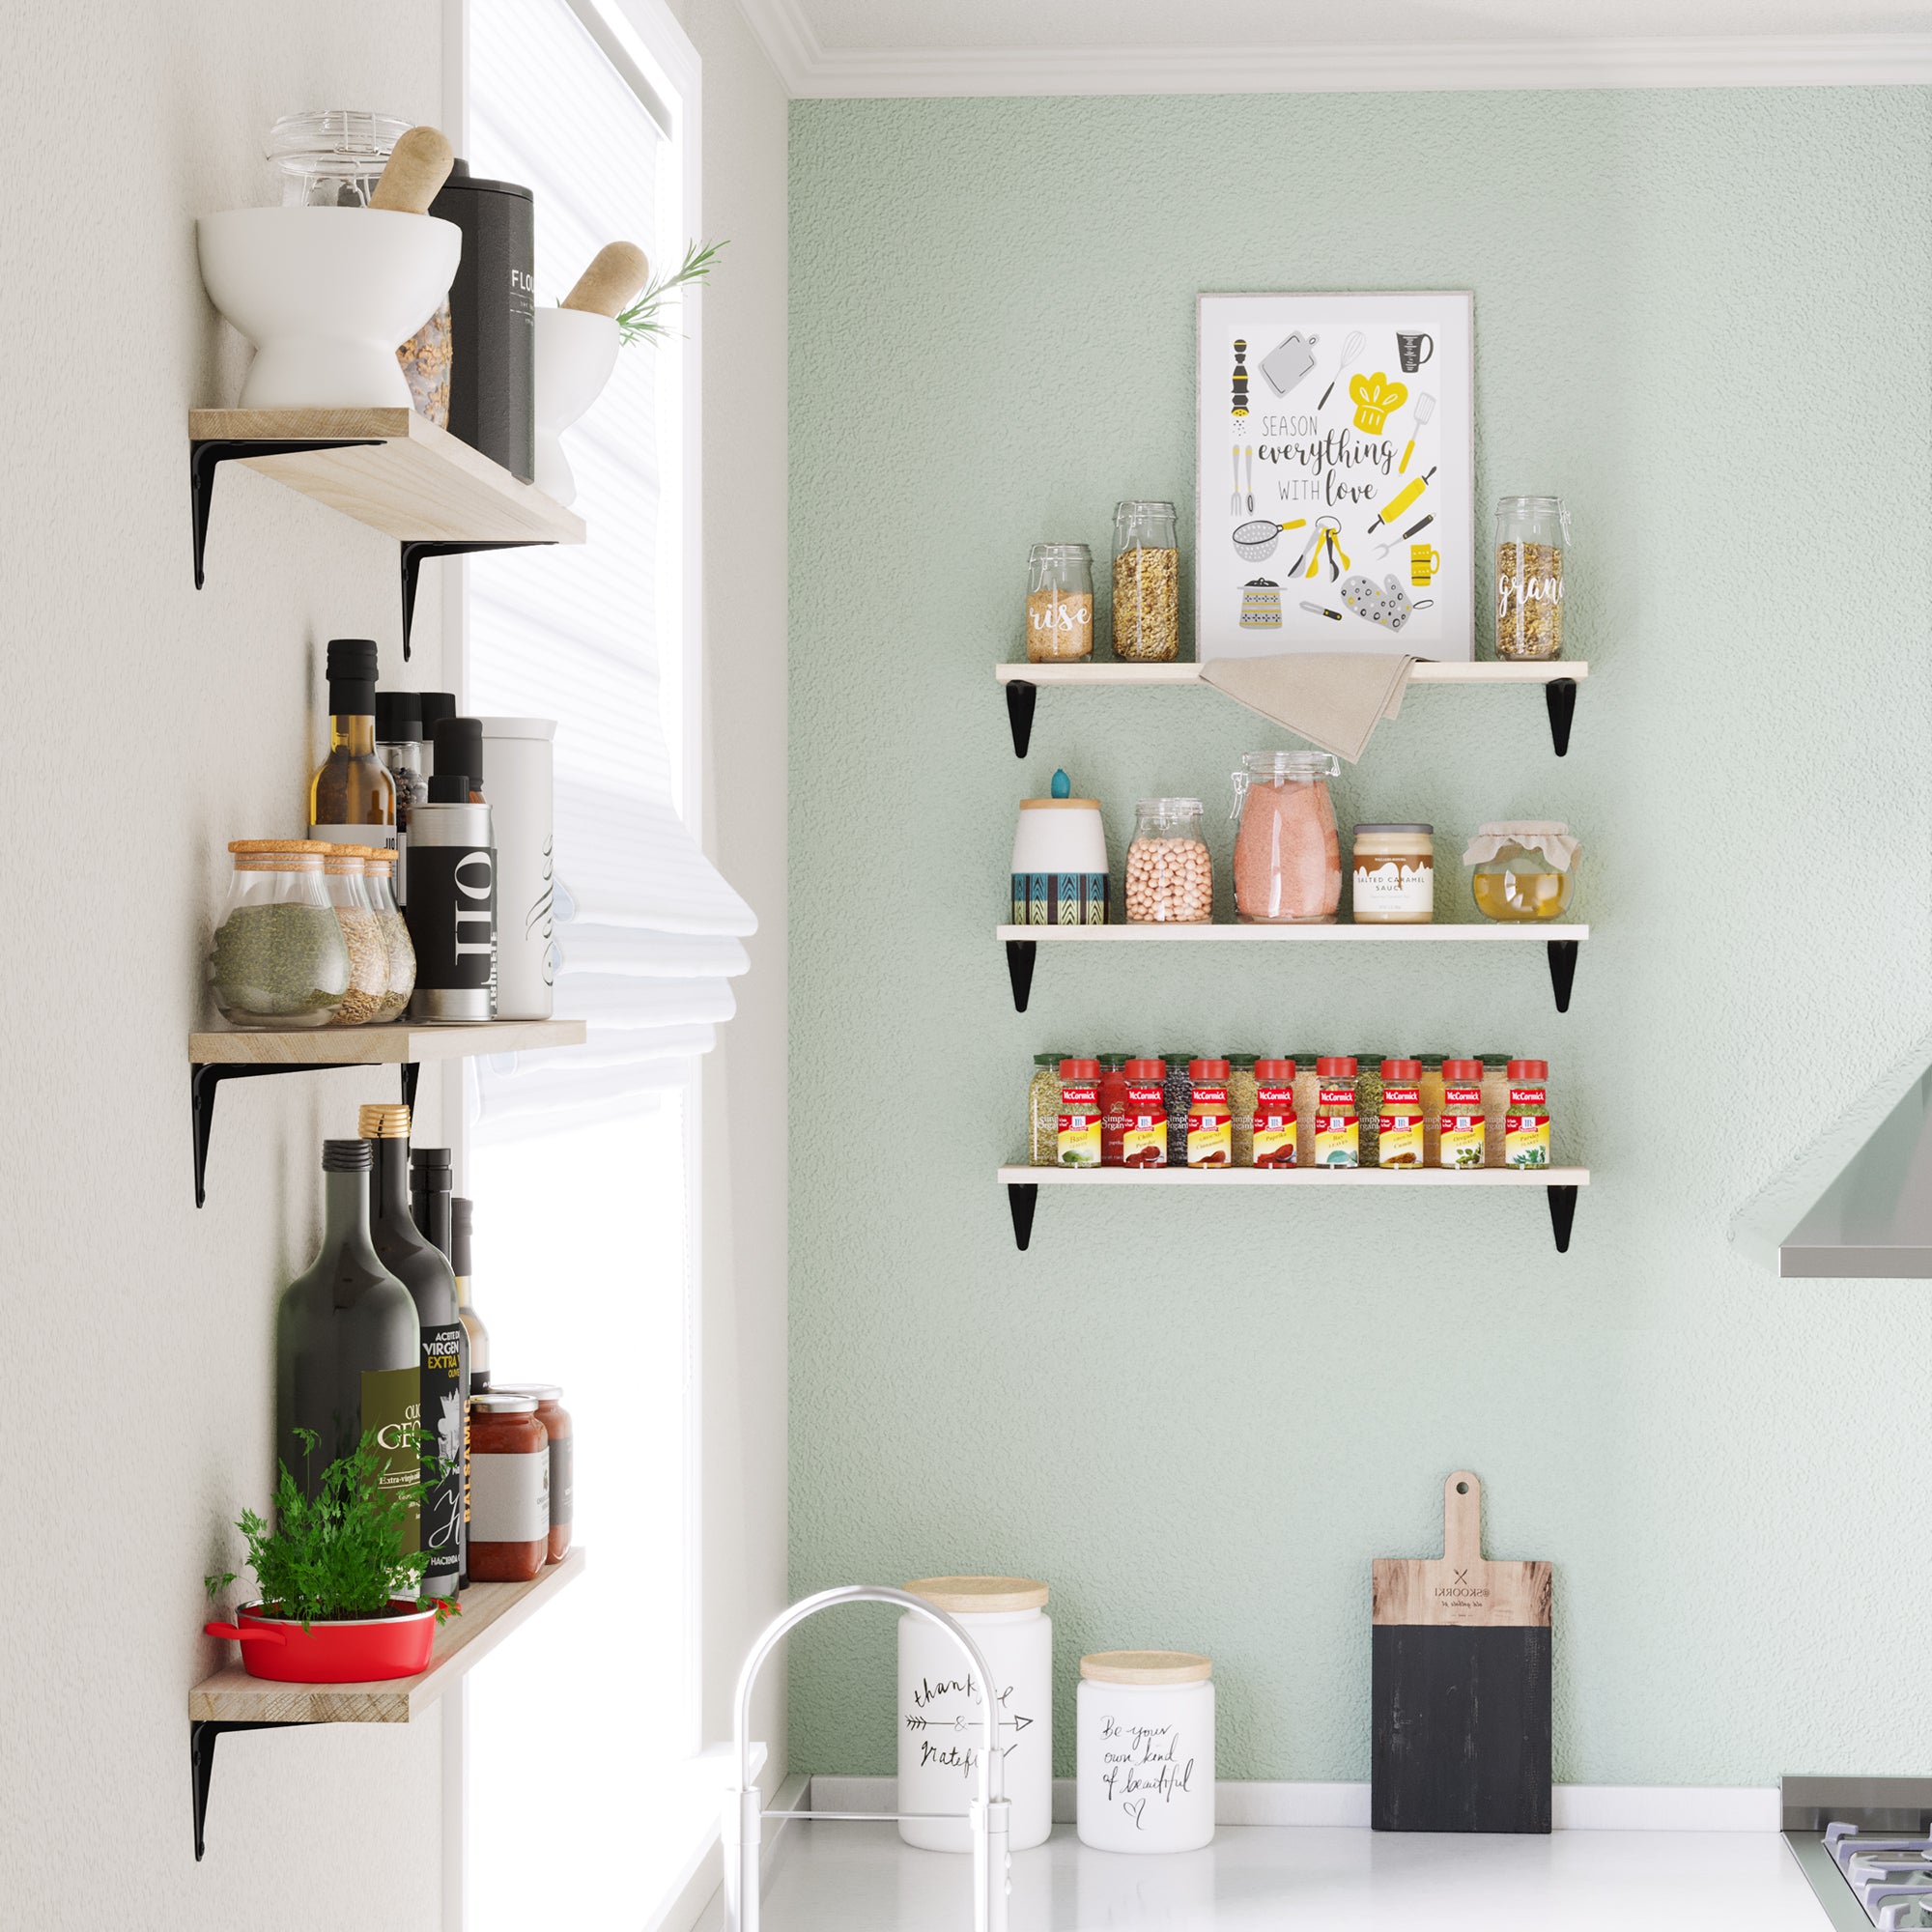 Wall shelves for kitchen storage with spices and jars on wooden shelves with black metal brackets.